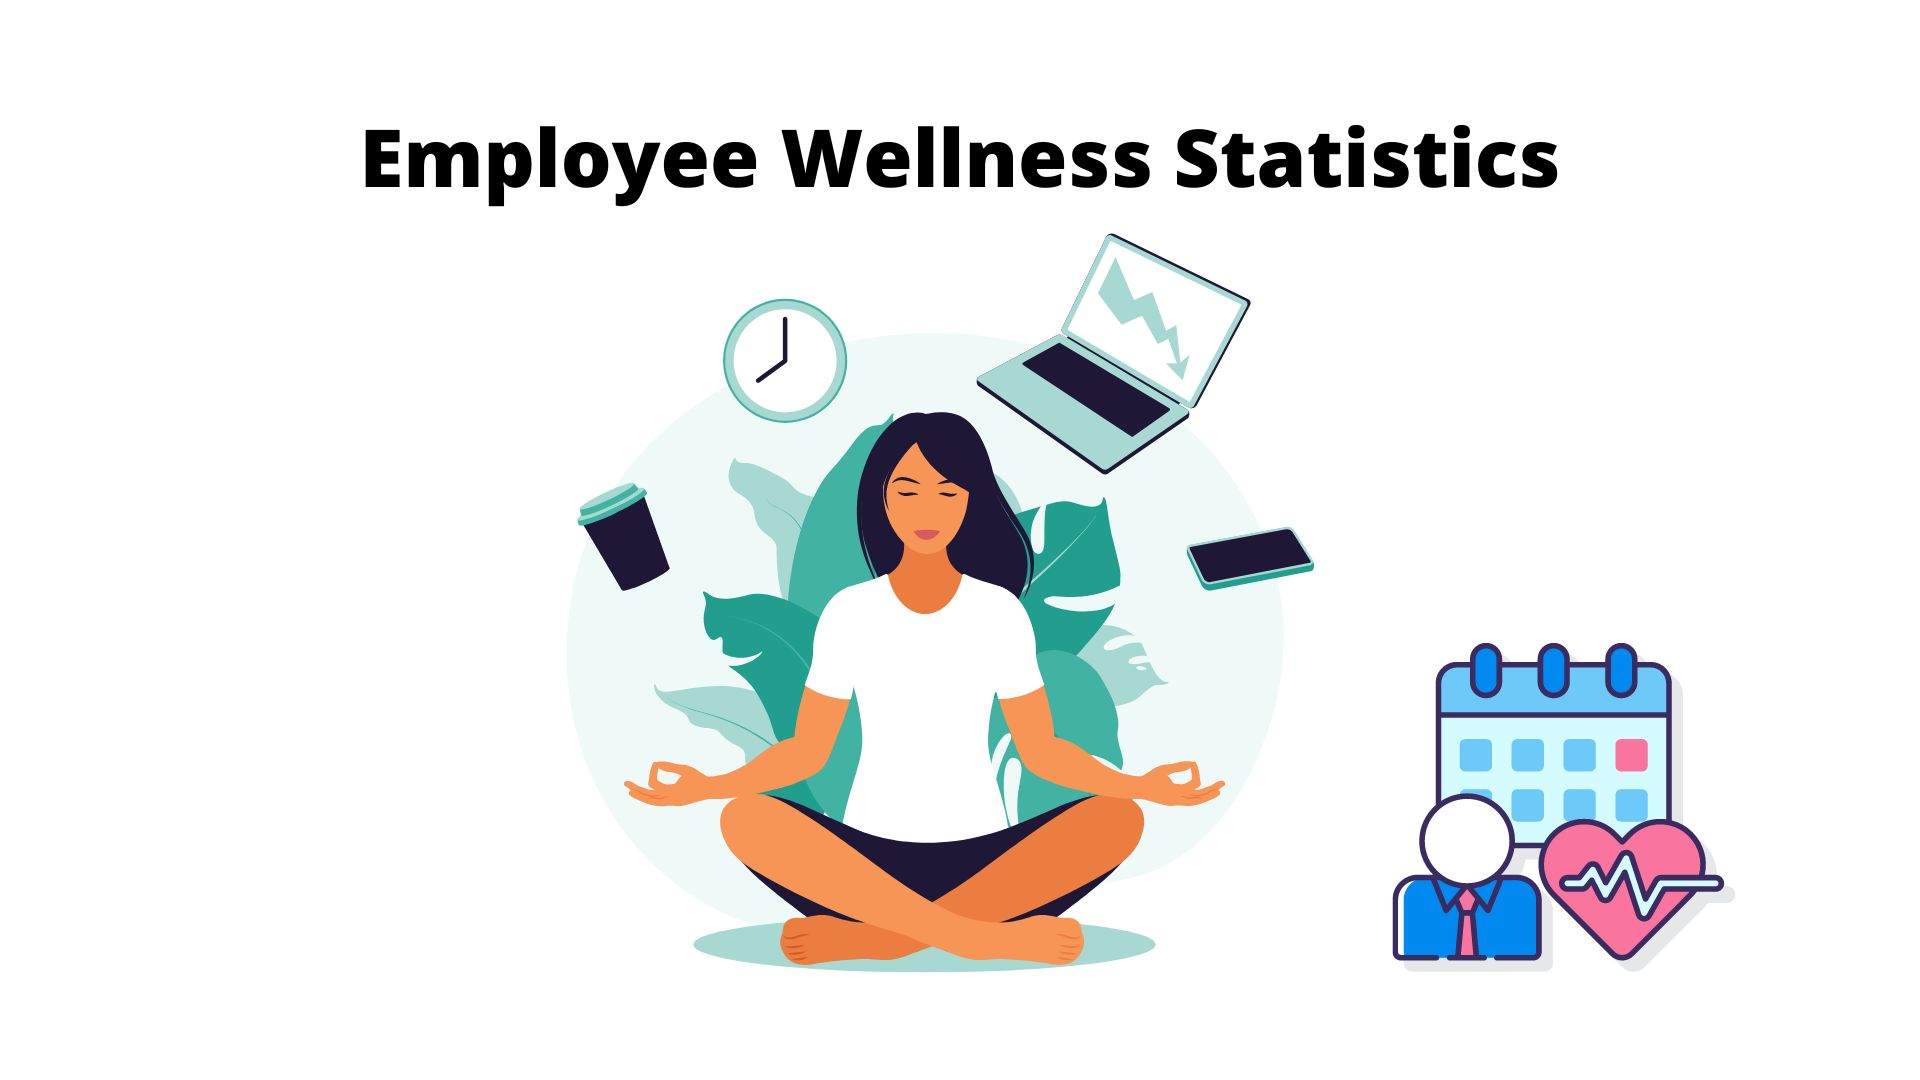 25+ Employee Wellness Statistics For 2022 – See How Workplace Wellness Programs Are Improving!